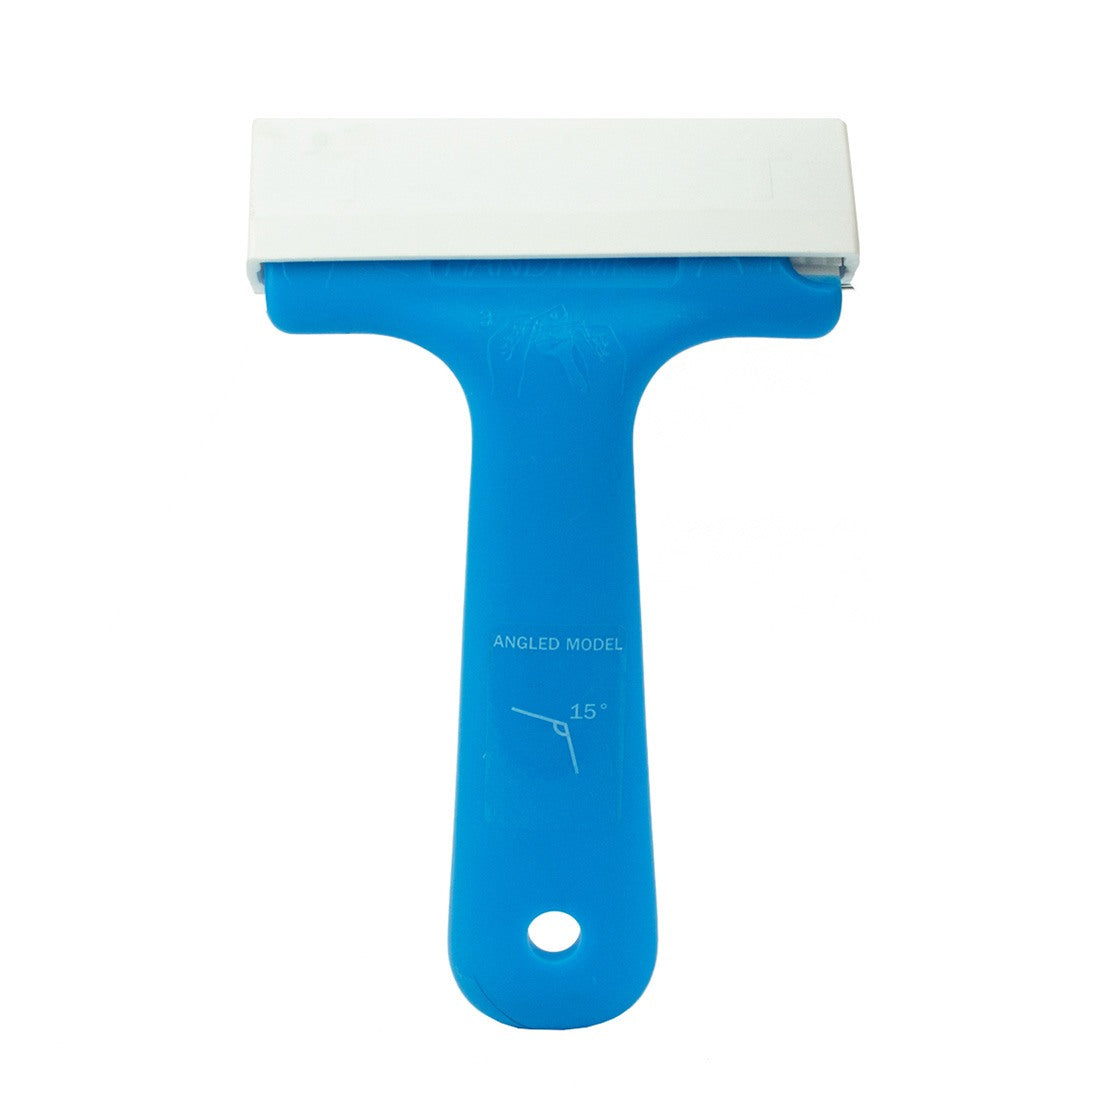 Triumph Angled Scraper - 3 Inch - With Cover - Front View